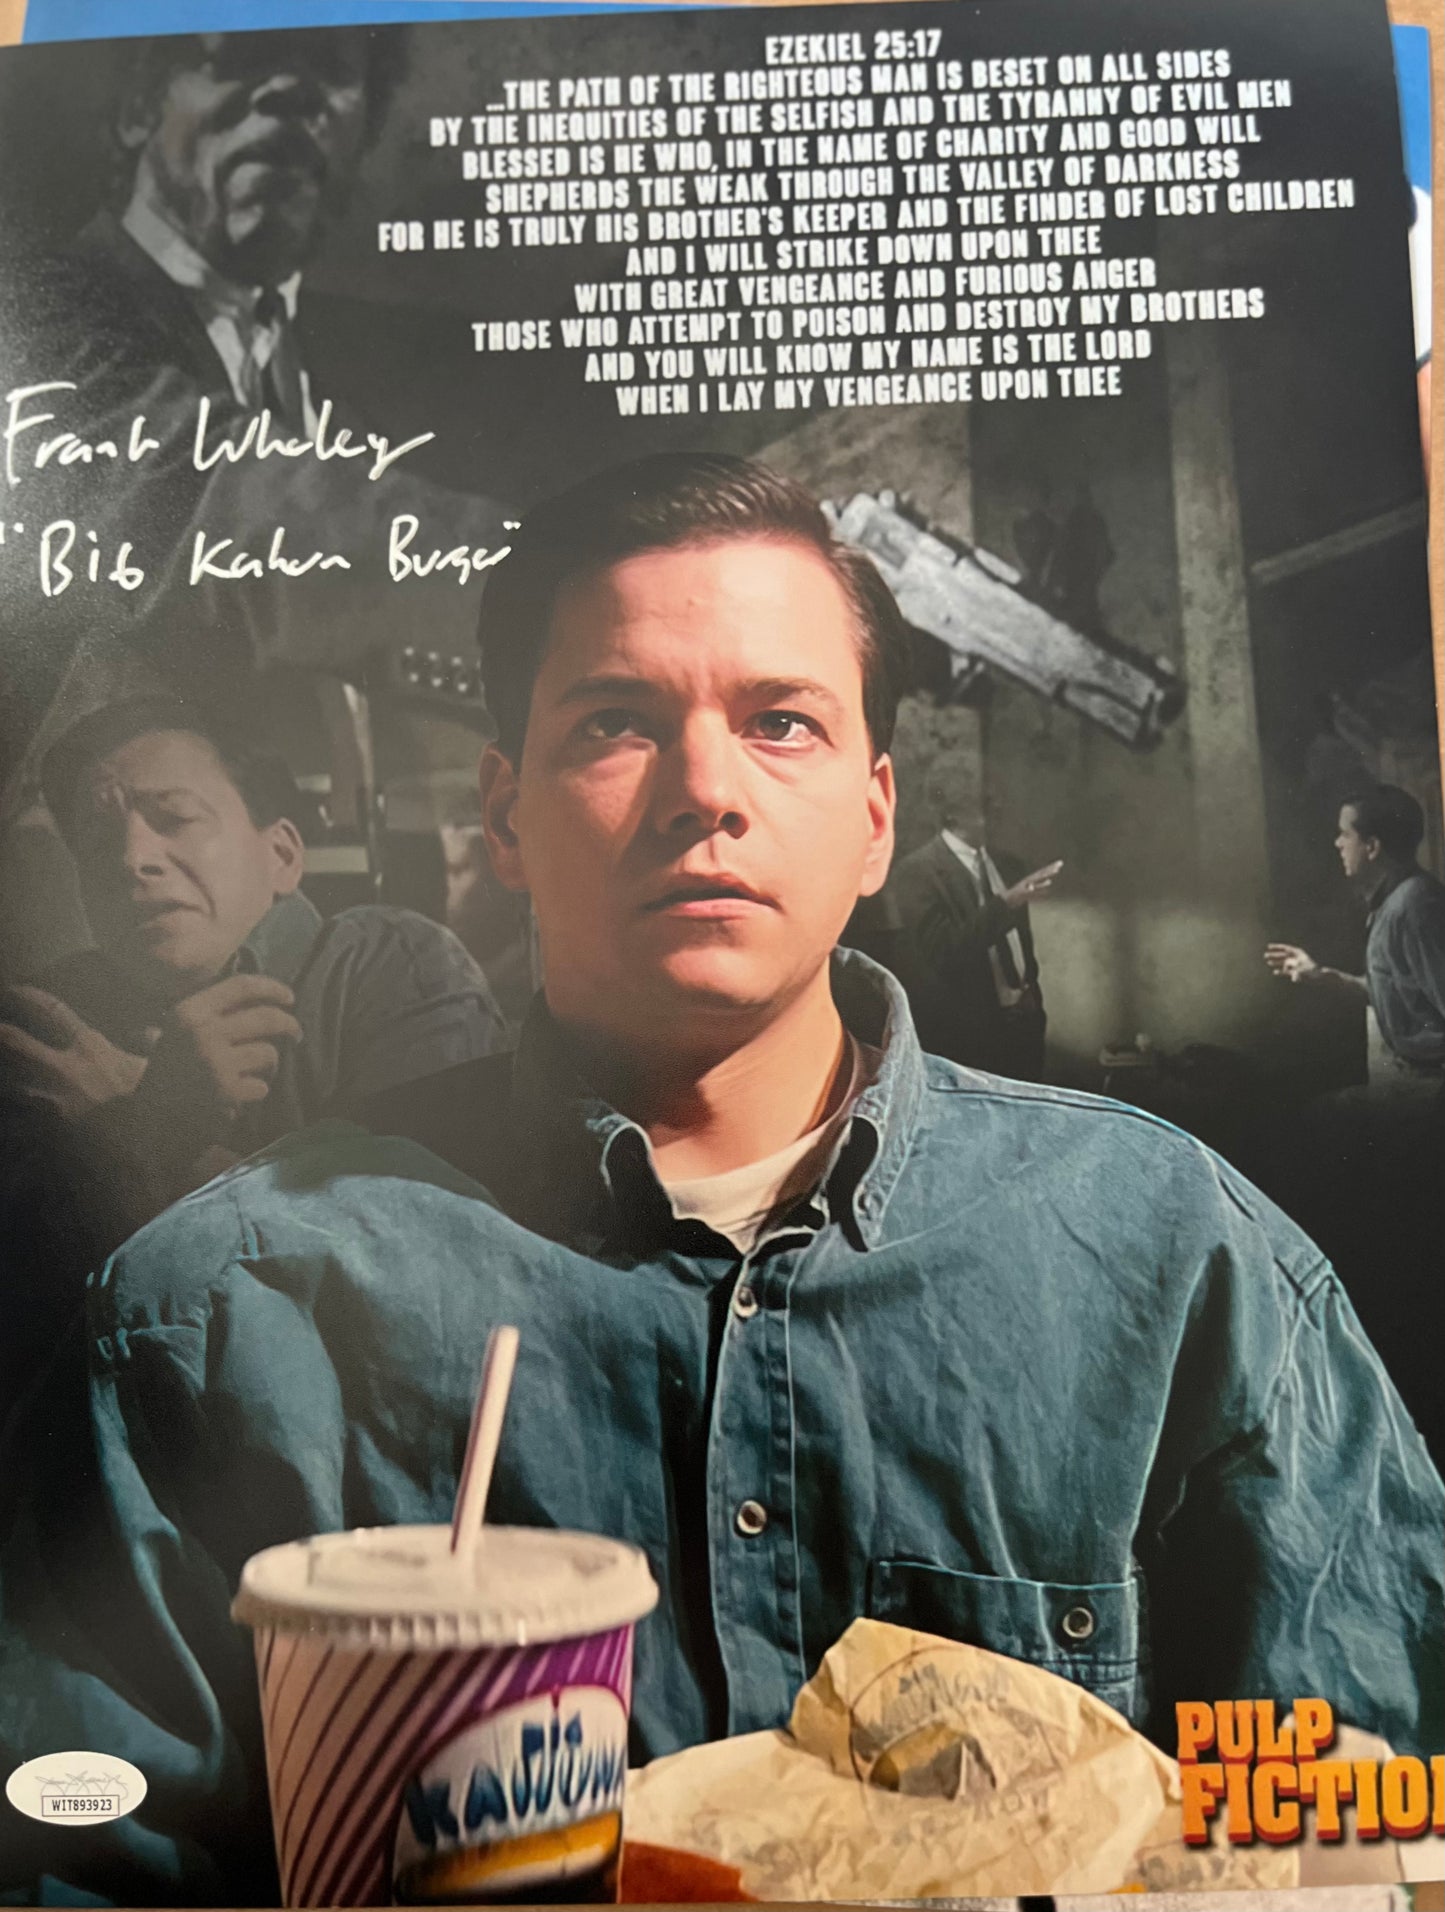 Pulp Fiction. Frank Whaley signed 11x14 scripture photo